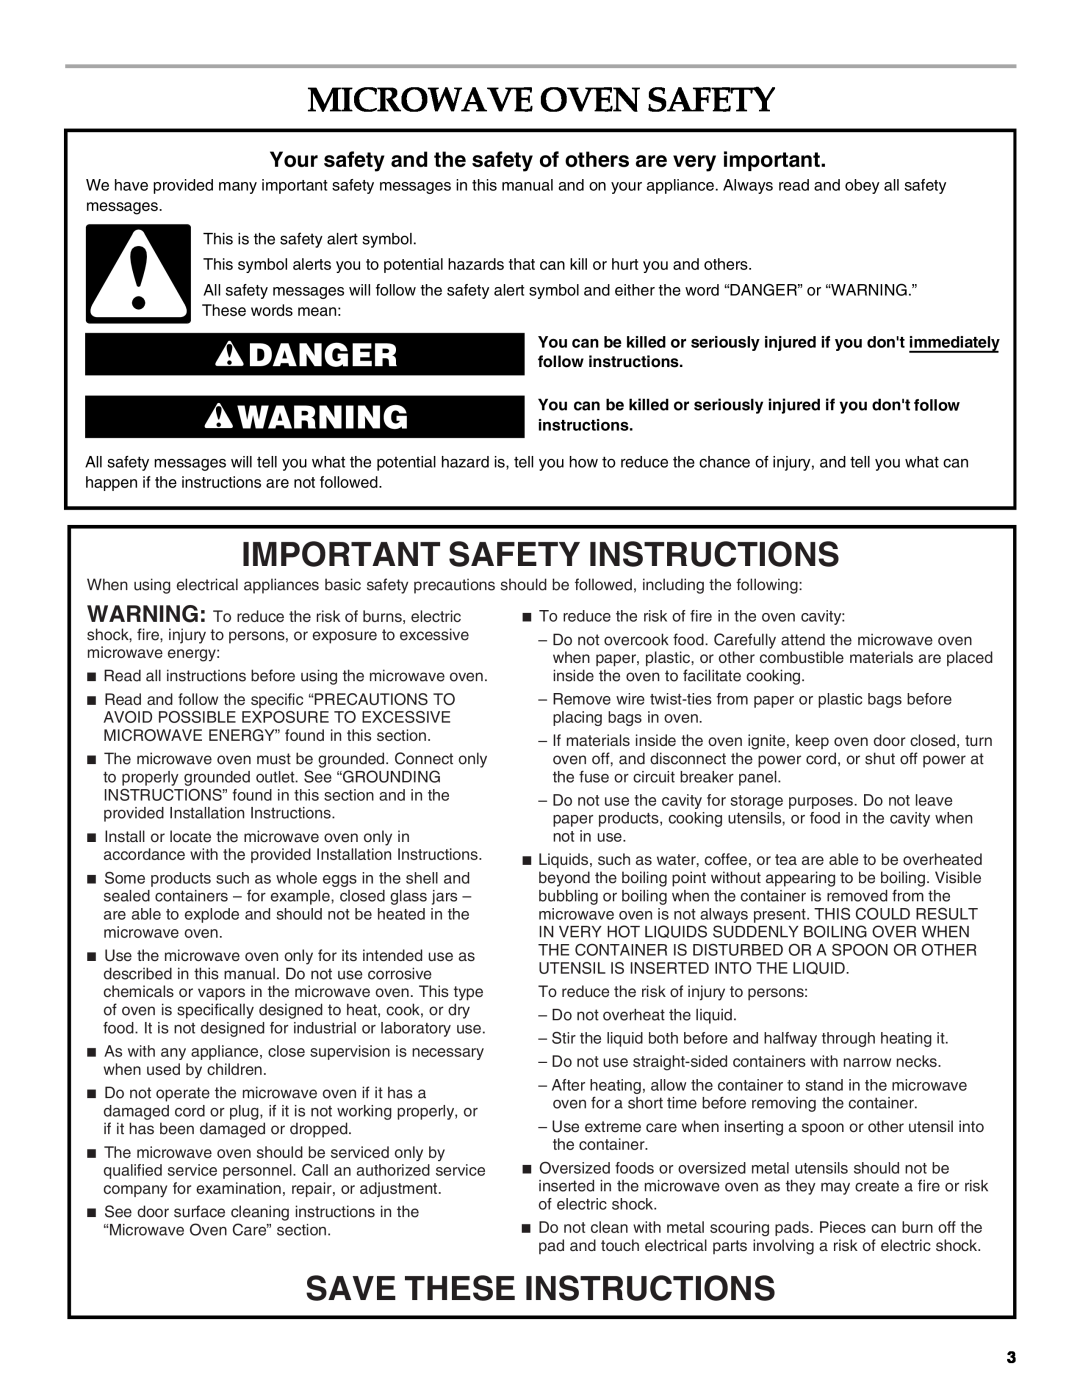 KitchenAid KCMS2055 manual Microwave Oven Safety, Important Safety Instructions, Save These Instructions, Danger 